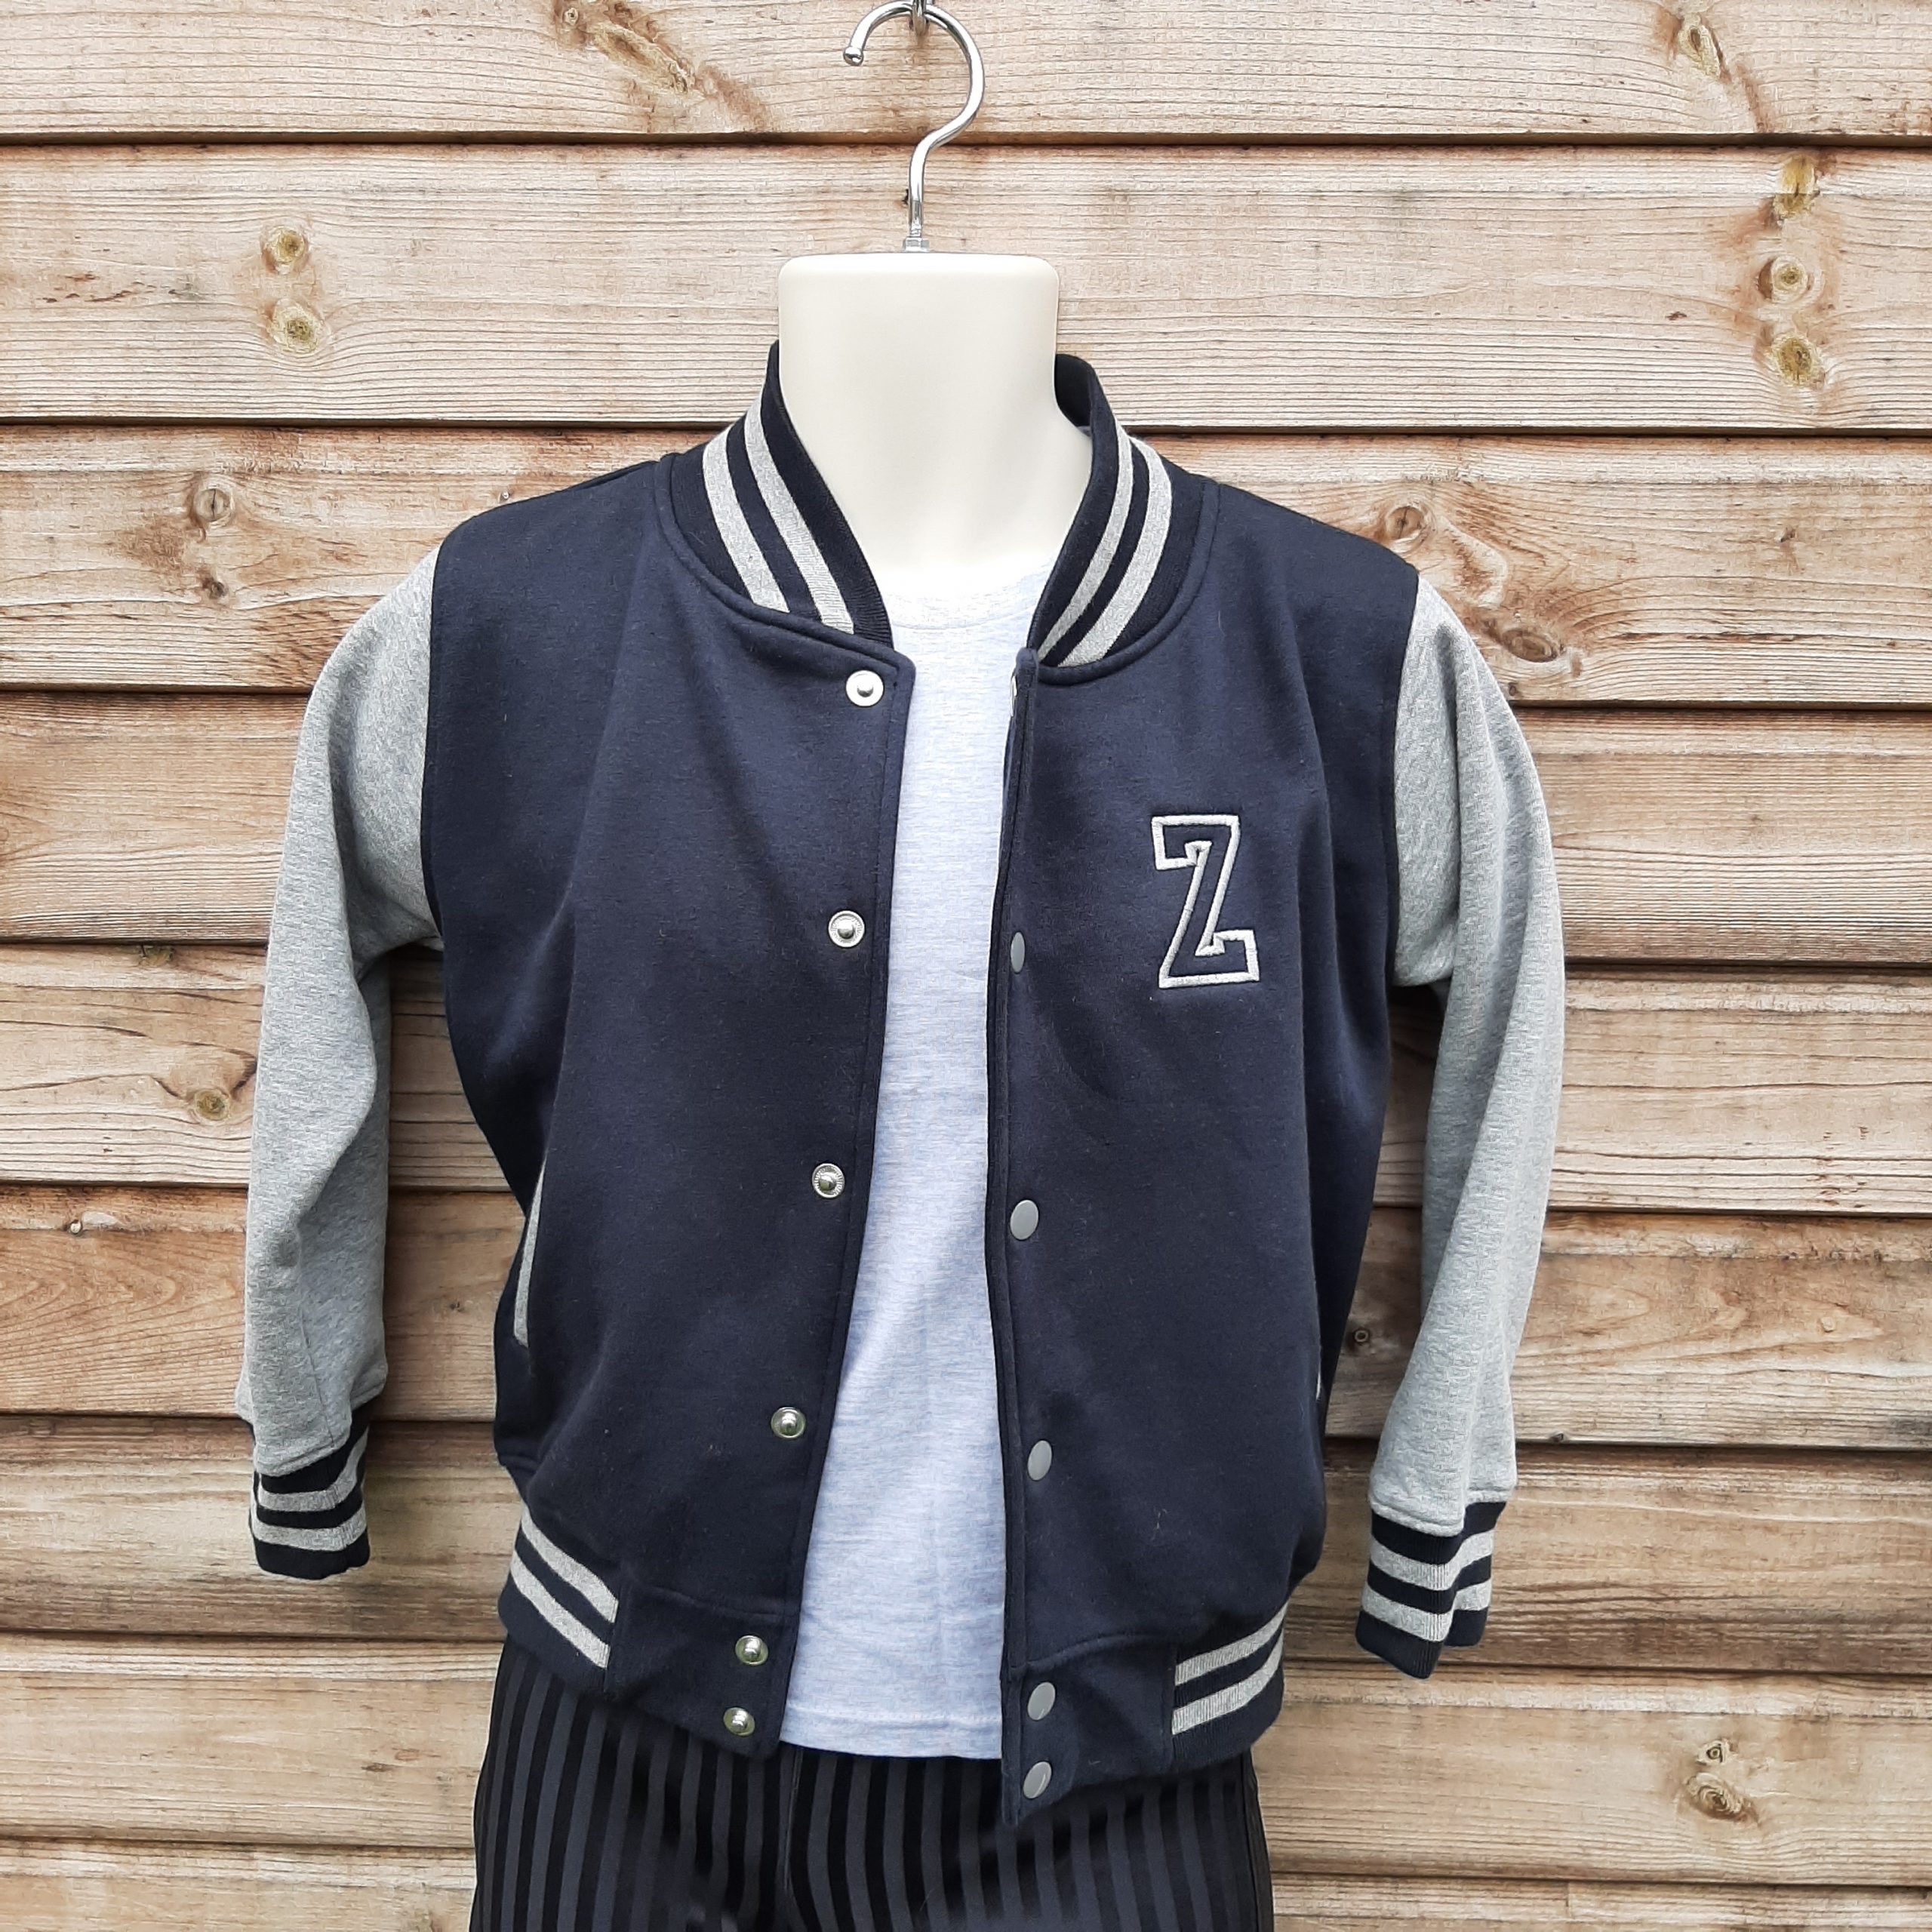 Children's varsity jacket on model in black and grey with embroidered initial hung up